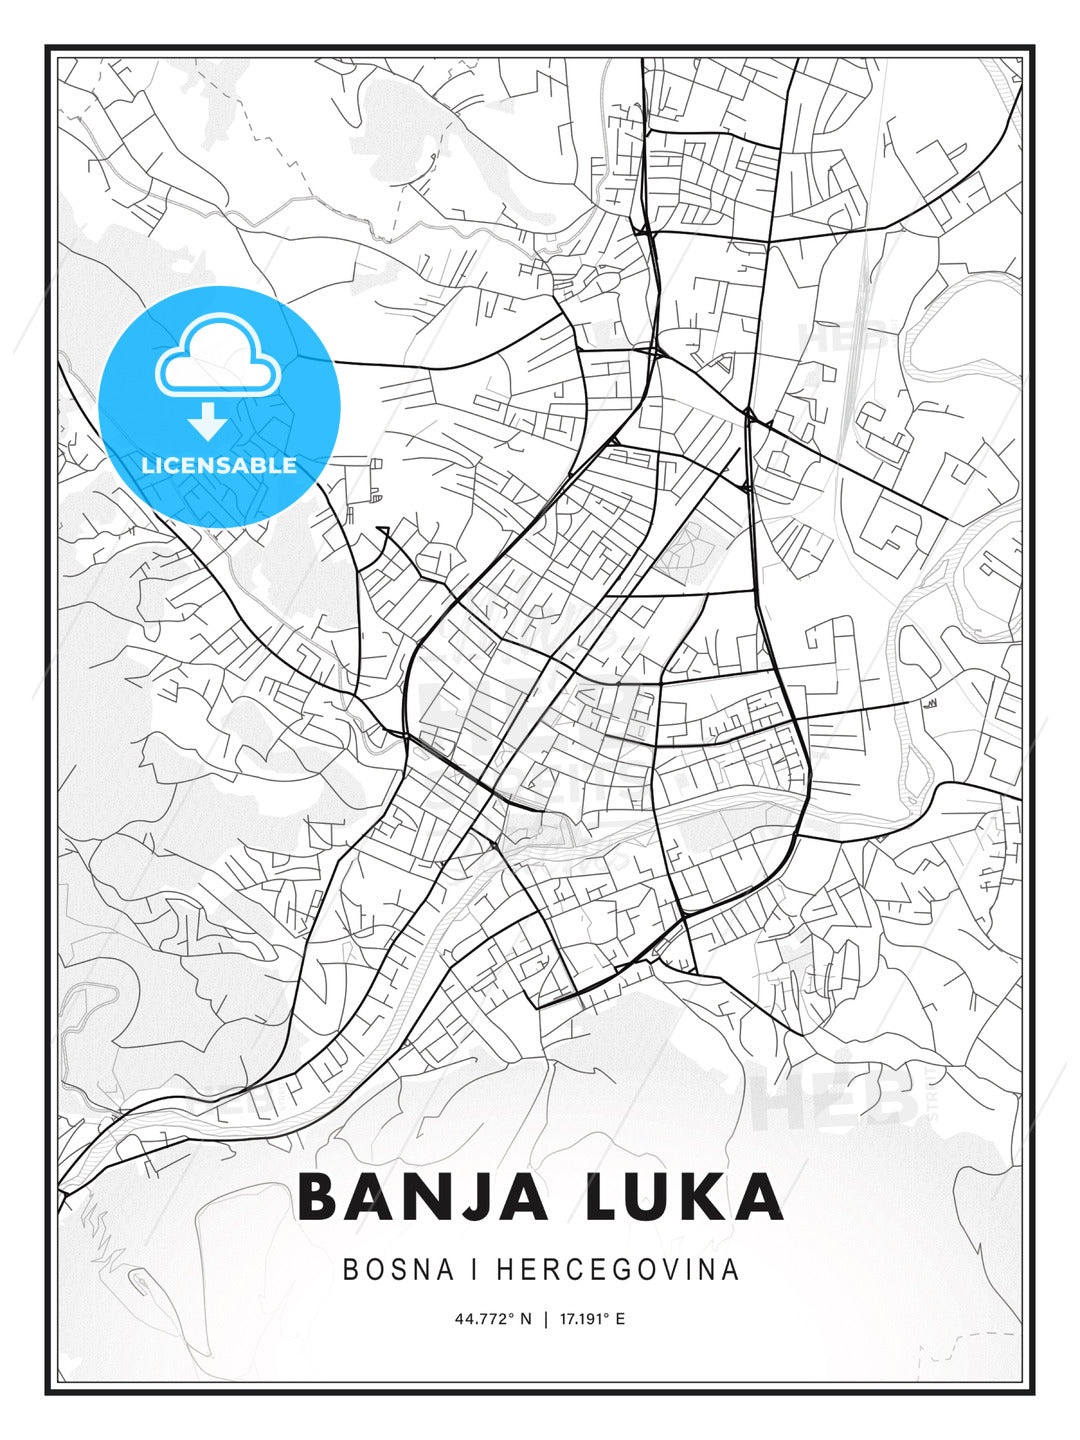 Banja Luka, Bosnia and Herzegovina, Modern Print Template in Various Formats - HEBSTREITS Sketches